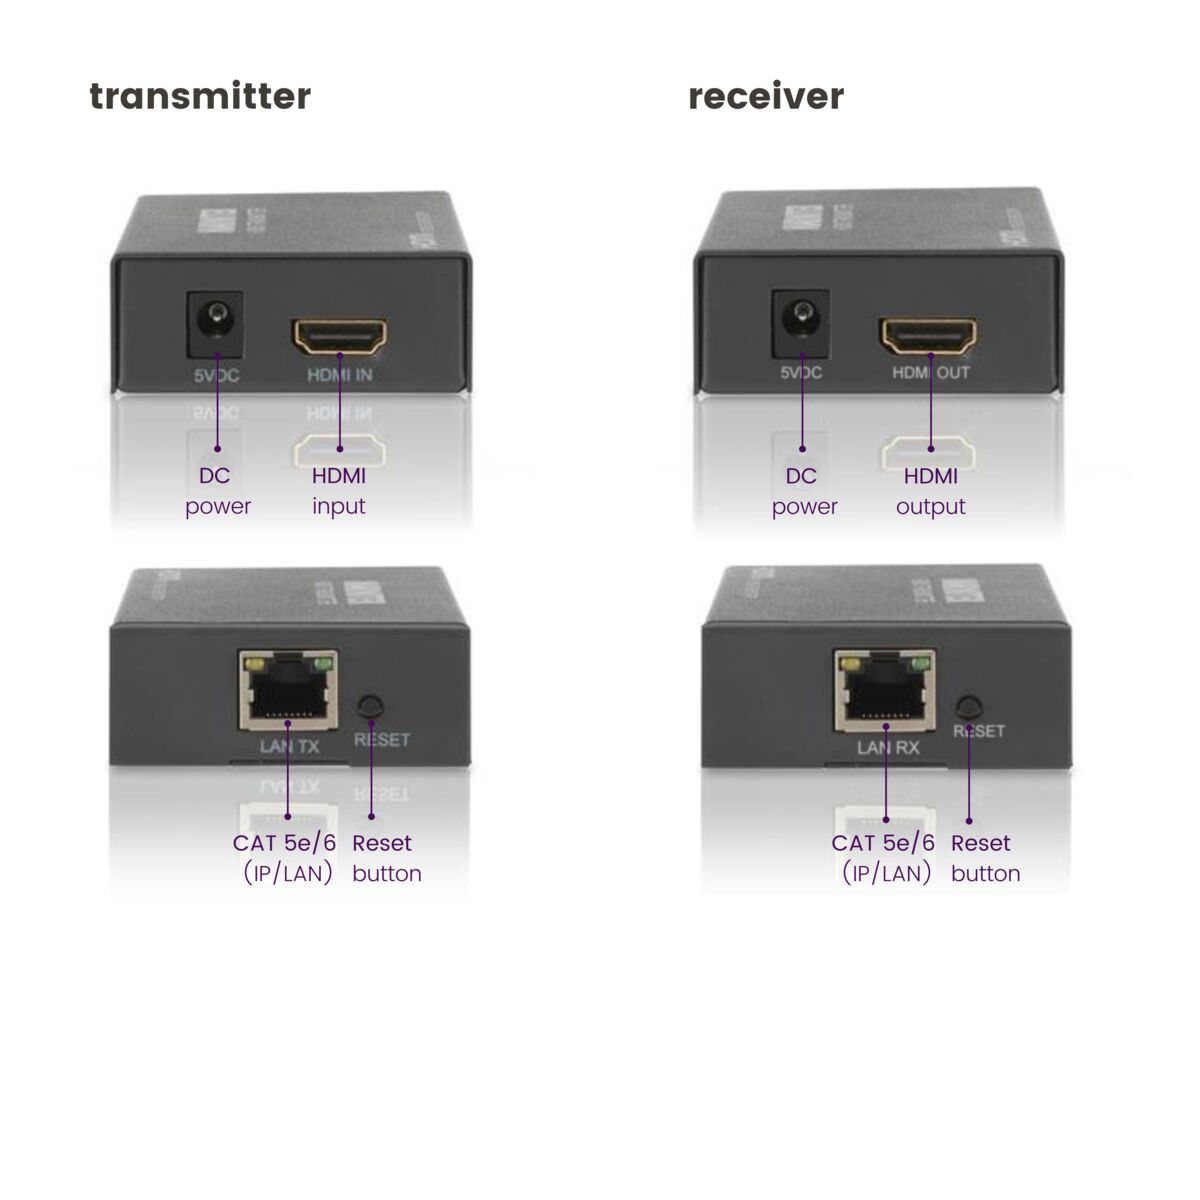 MegaView 90 - HDMI Extender Ethernet - Connections Image HDMI Transmitter and HDMI Receiver | Marmitek